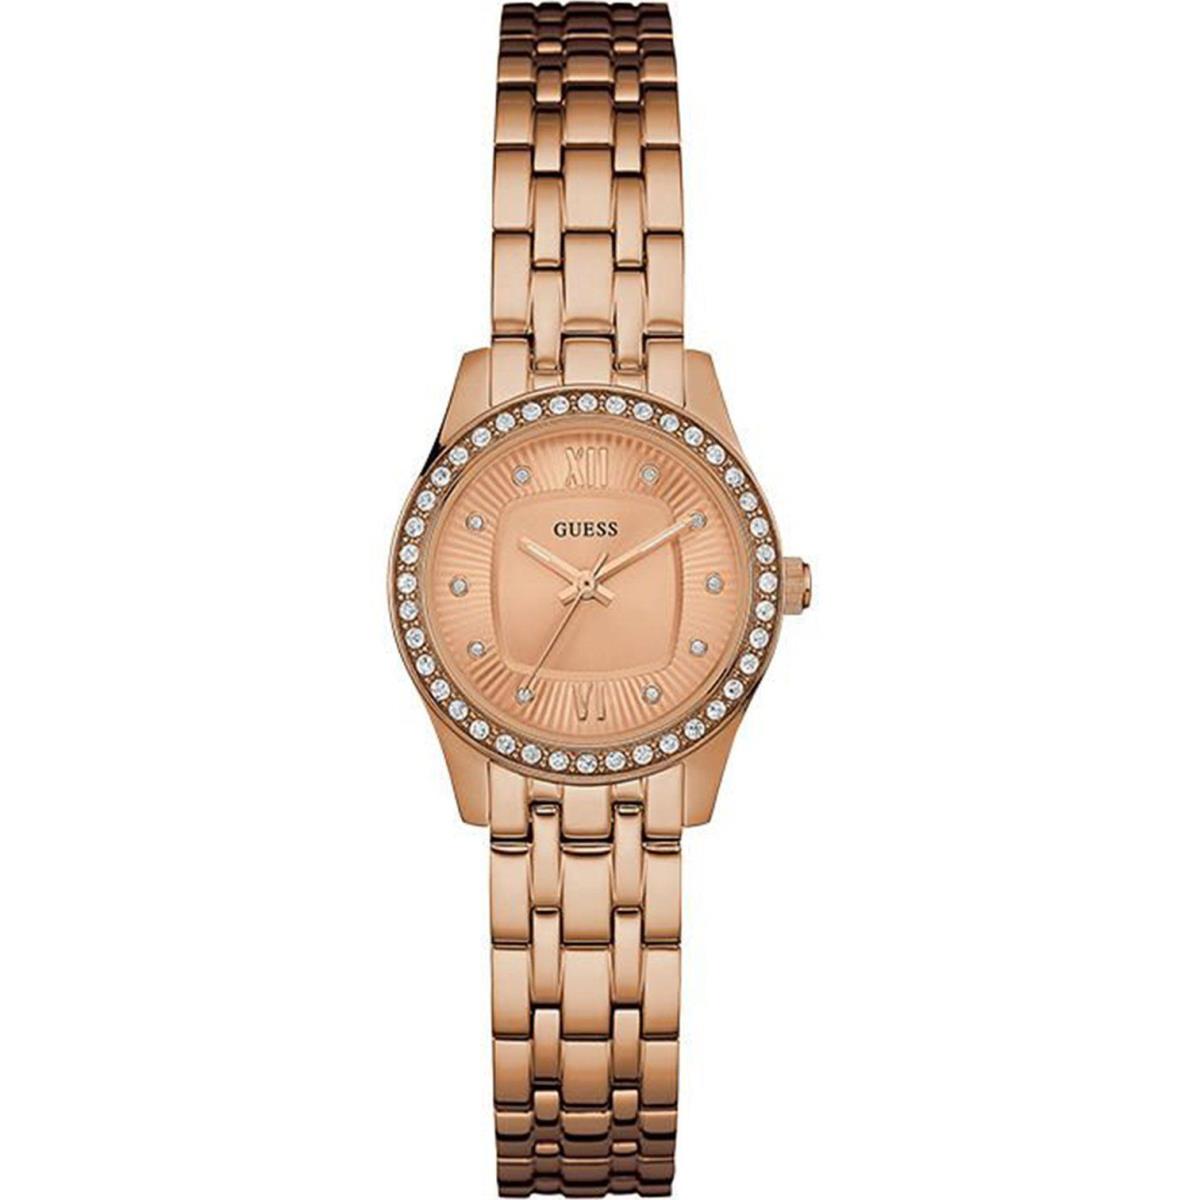 Guess Women Dress Stainless Steel Rose Gold-tone Crystal Accented Bezel W0762L3